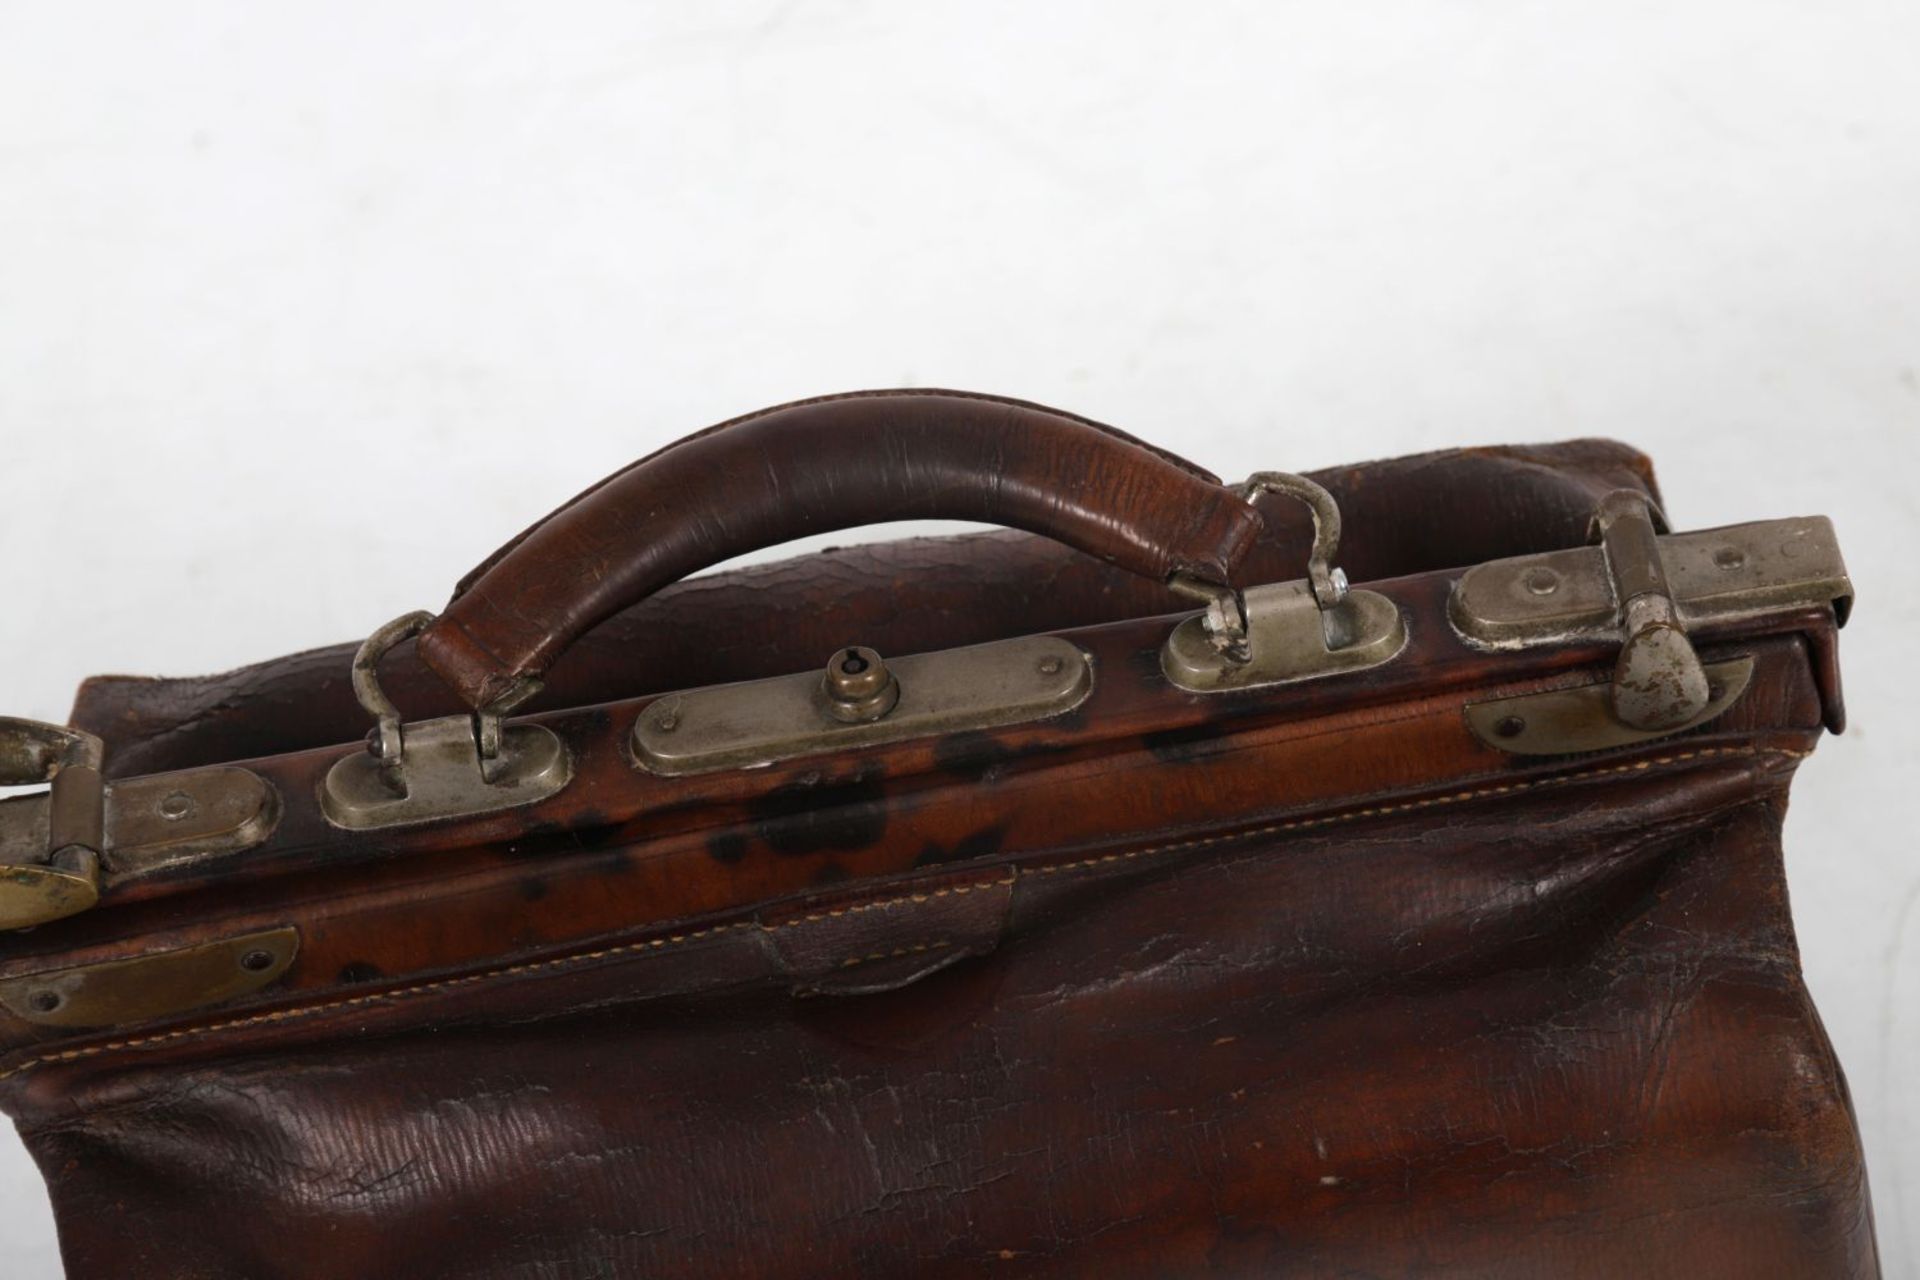 SMALL VINTAGE LEATHER GLADSTONE BAG - Image 2 of 2